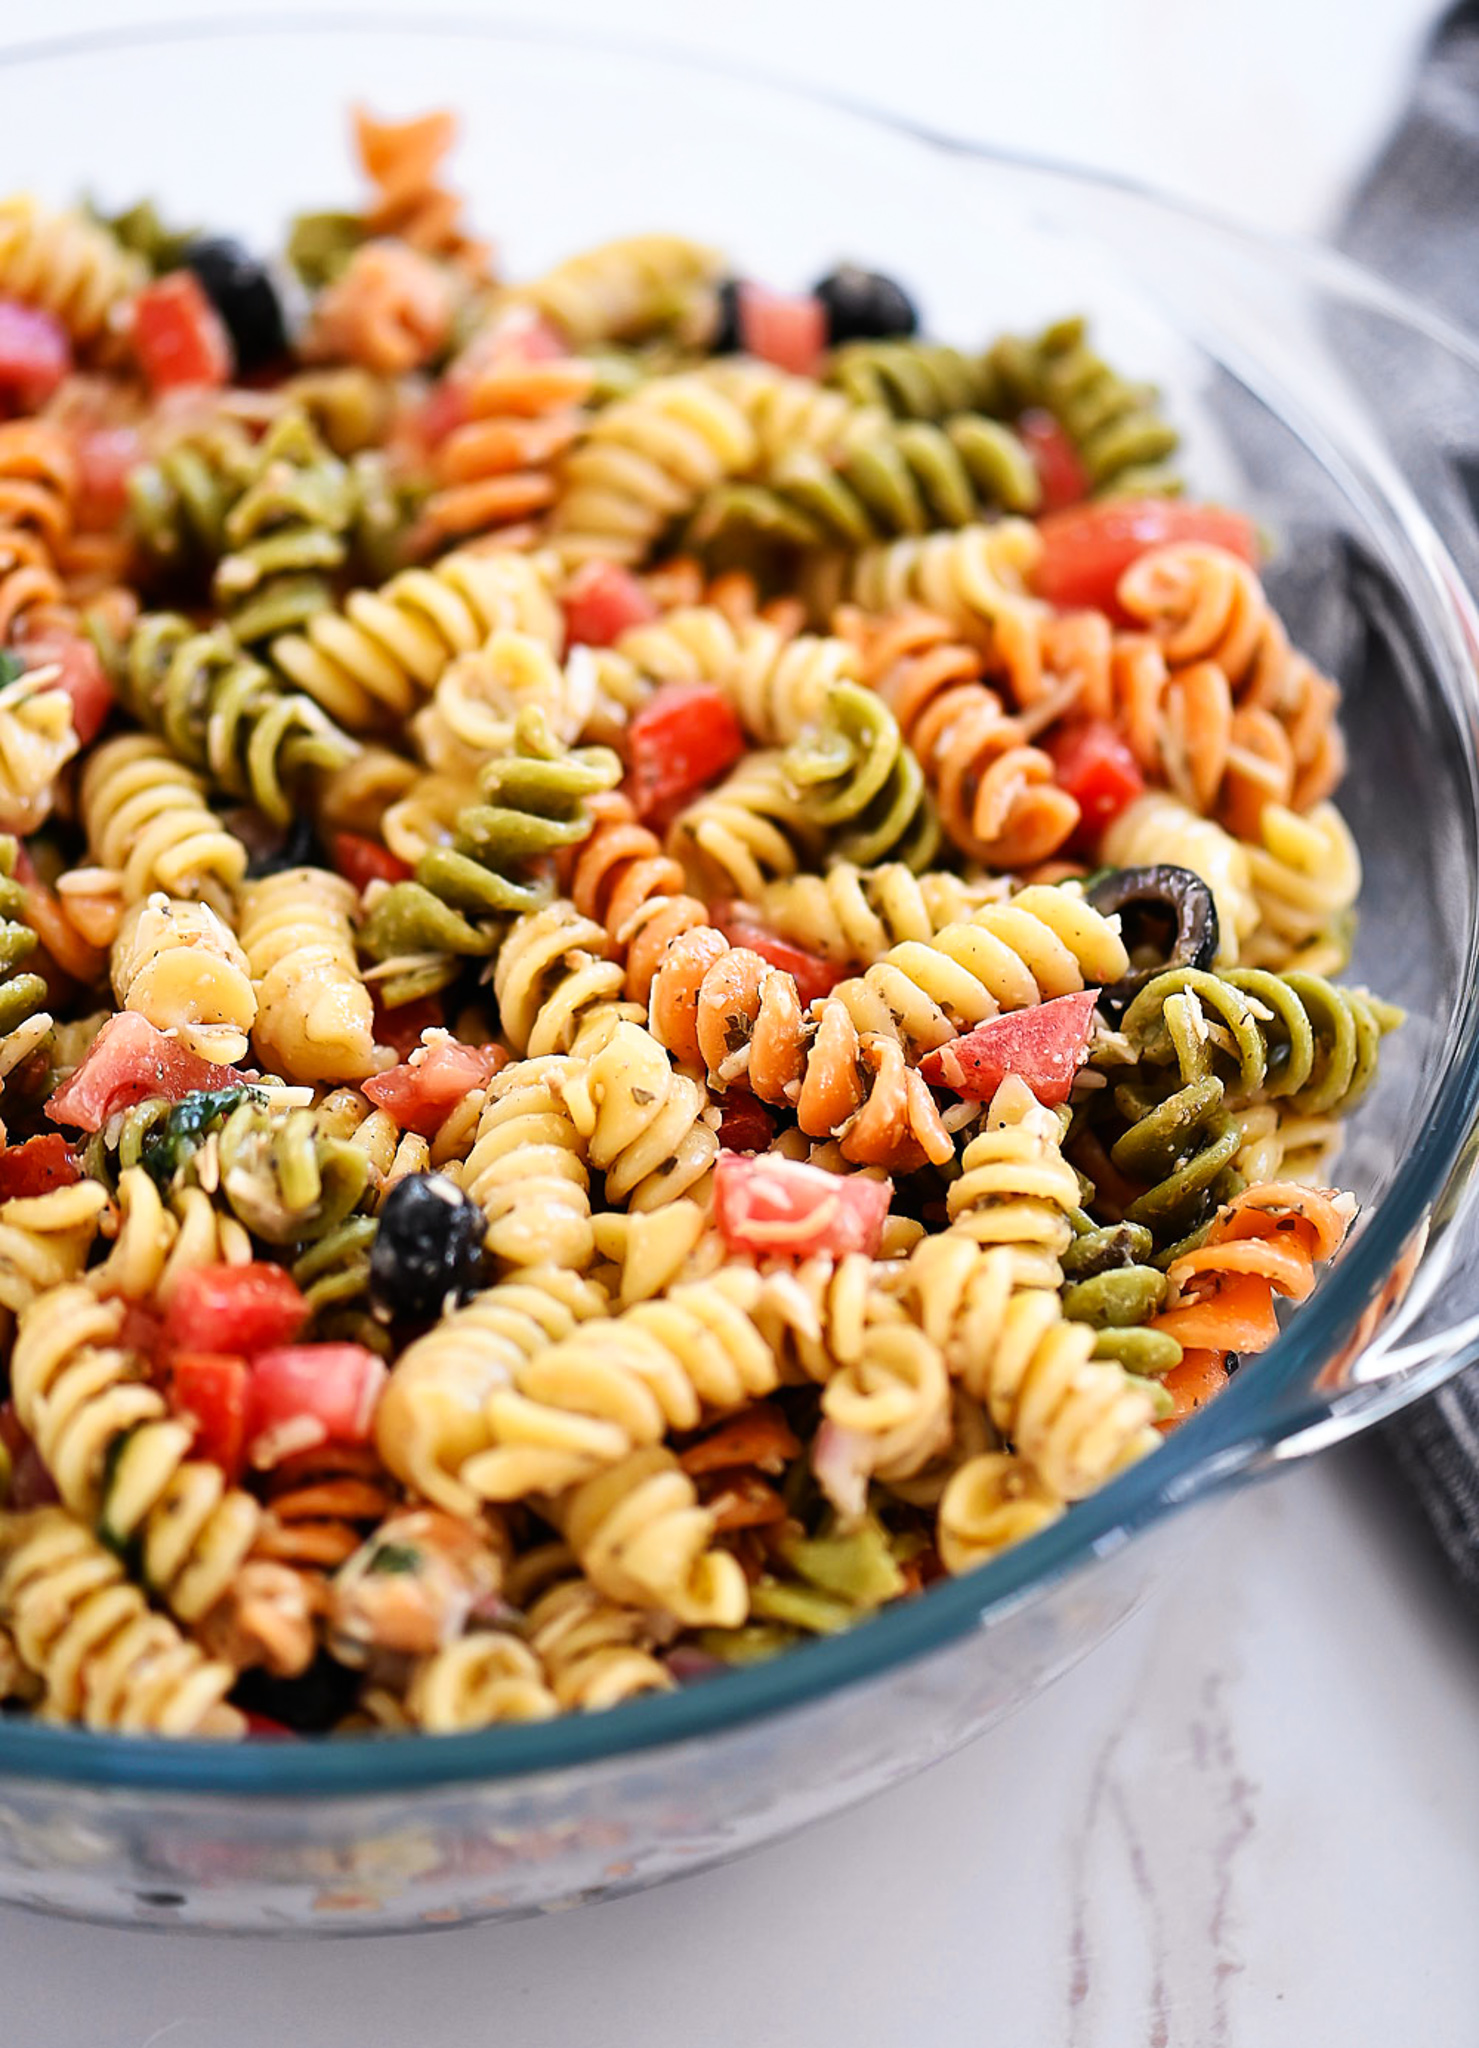 Tri Color Pasta Salad is filled with noodles, fresh veggies, and Parmesan cheese. It’s tossed in a creamy Caesar dressing and basil pesto